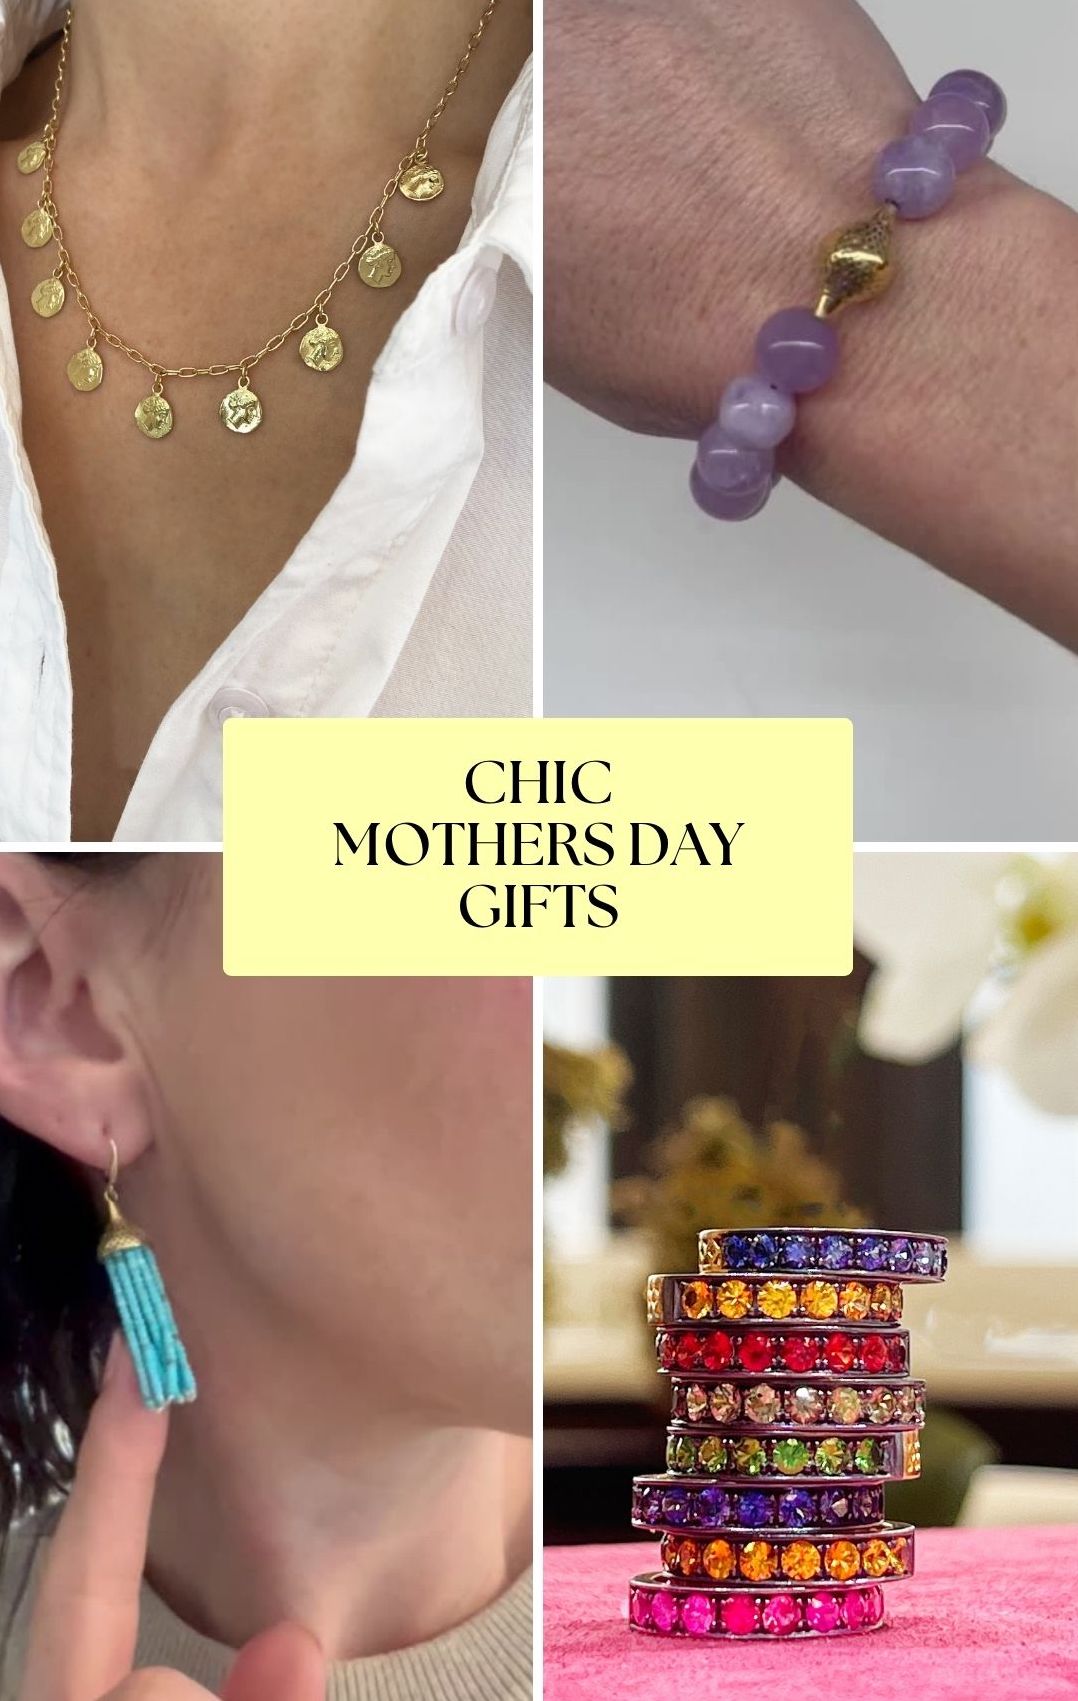 Chic Mothers Day Gift Ideas